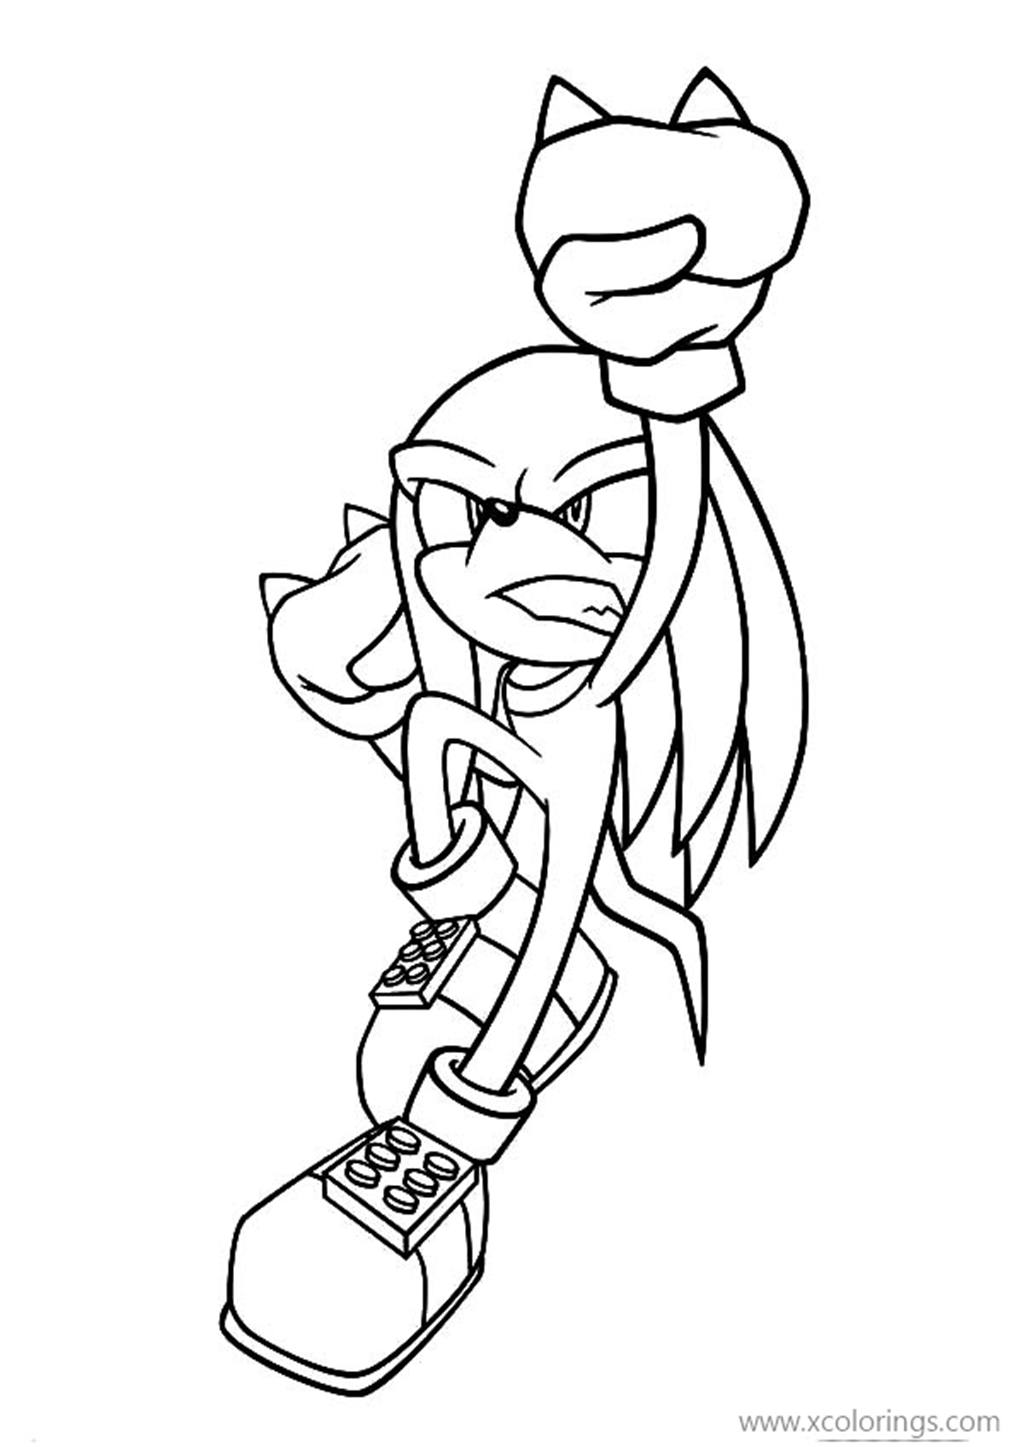 Free SEGA Knuckles The Echidna Coloring Pages printable